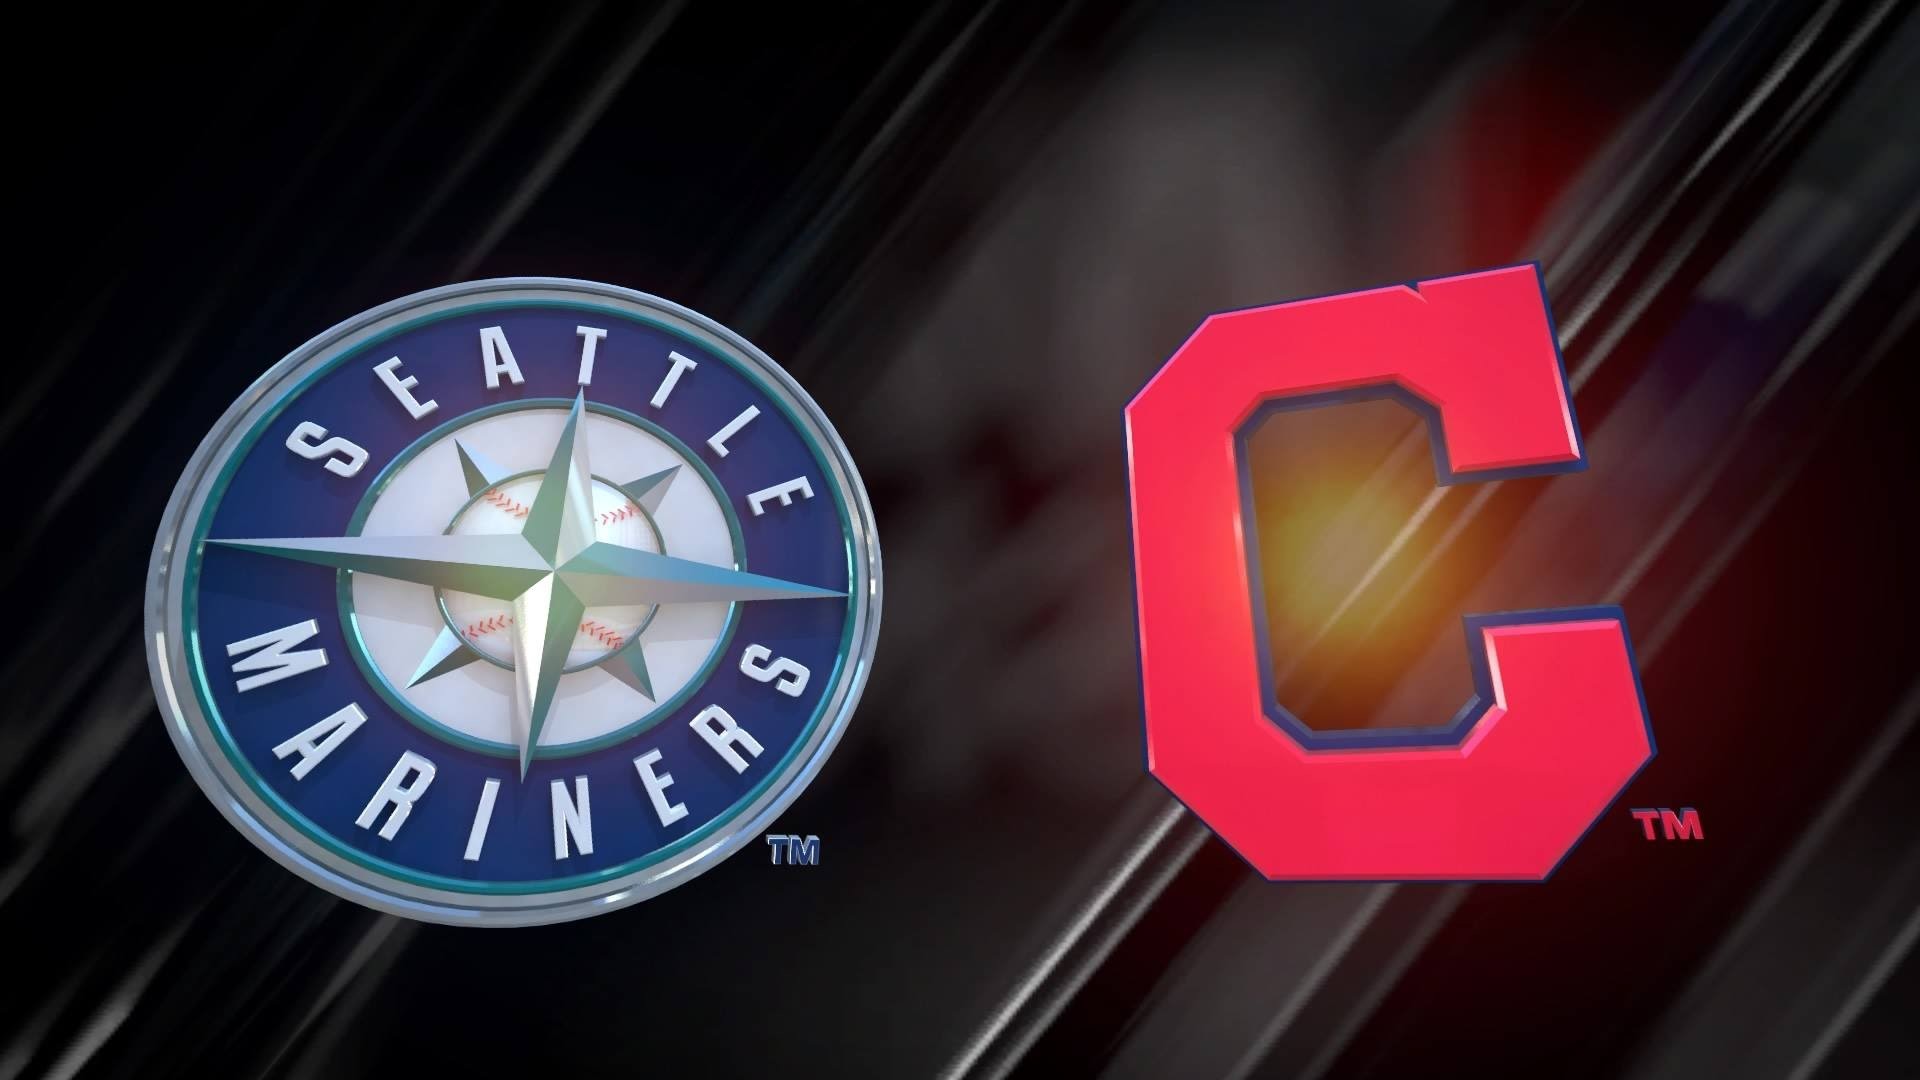 PS4 MLB 16 The Show Seattle MARINERS Vs Cleveland INDIANS